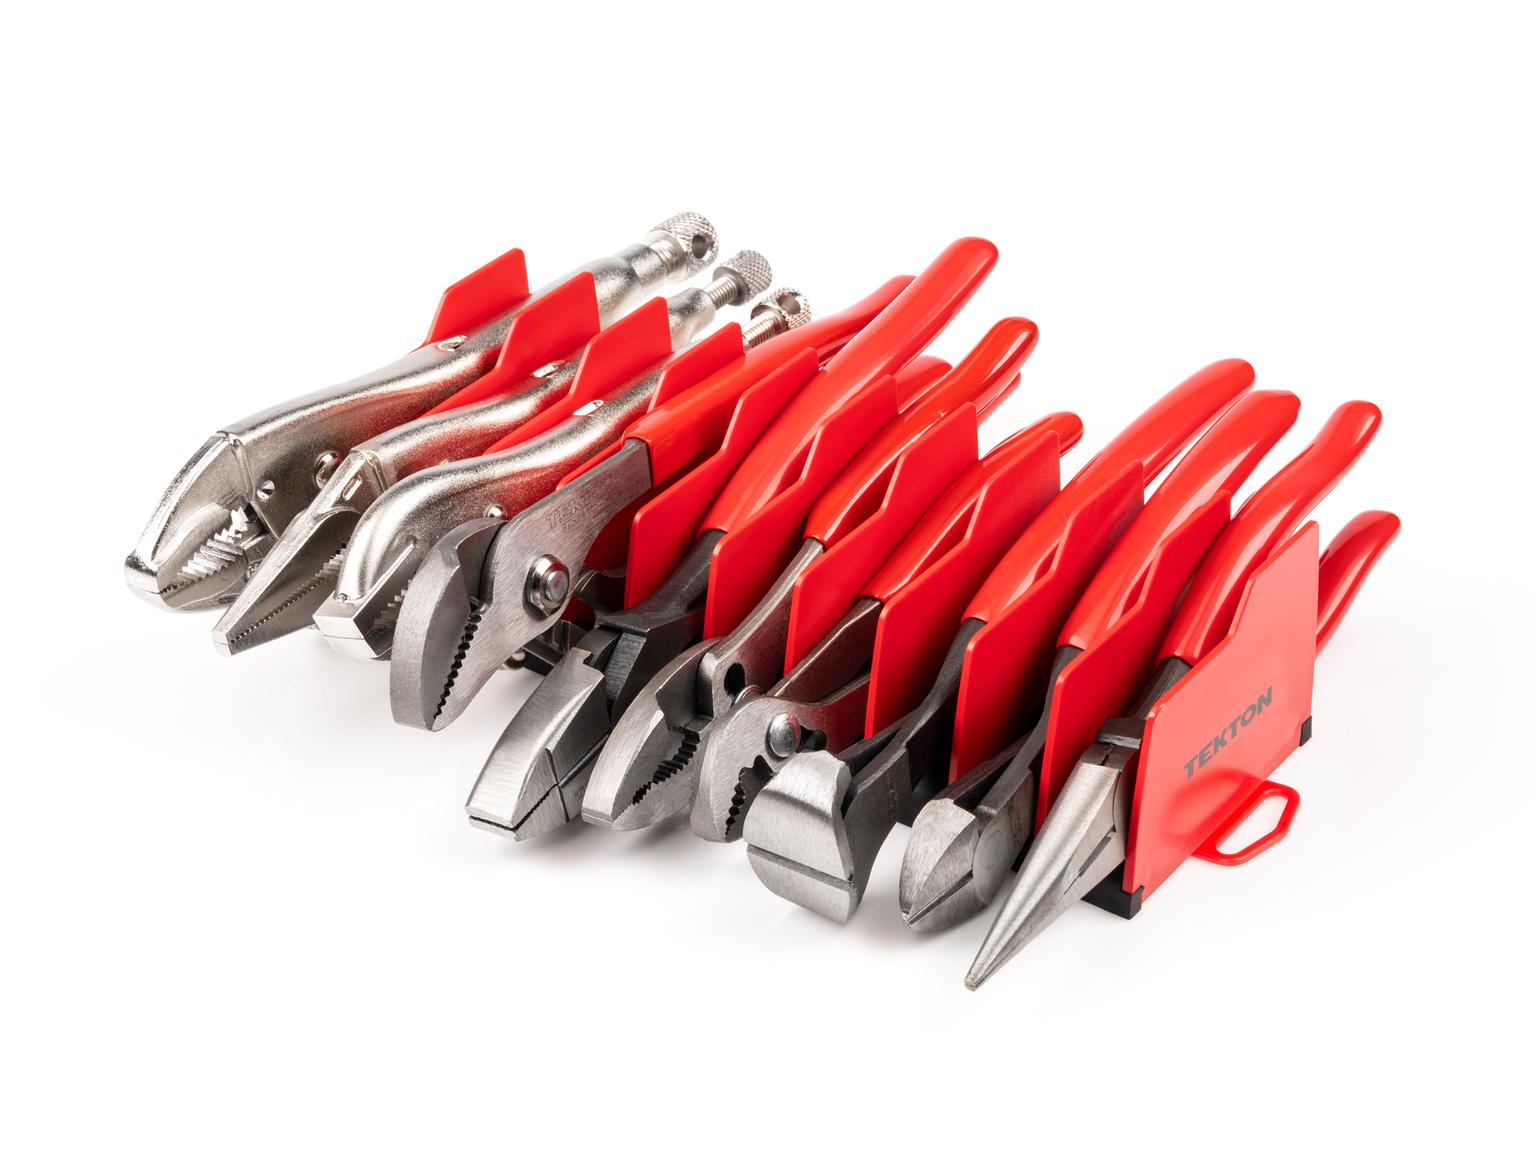 TEKTON PLR99202-T Gripping, Cutting, and Locking Pliers Set with Rack (10-Piece)